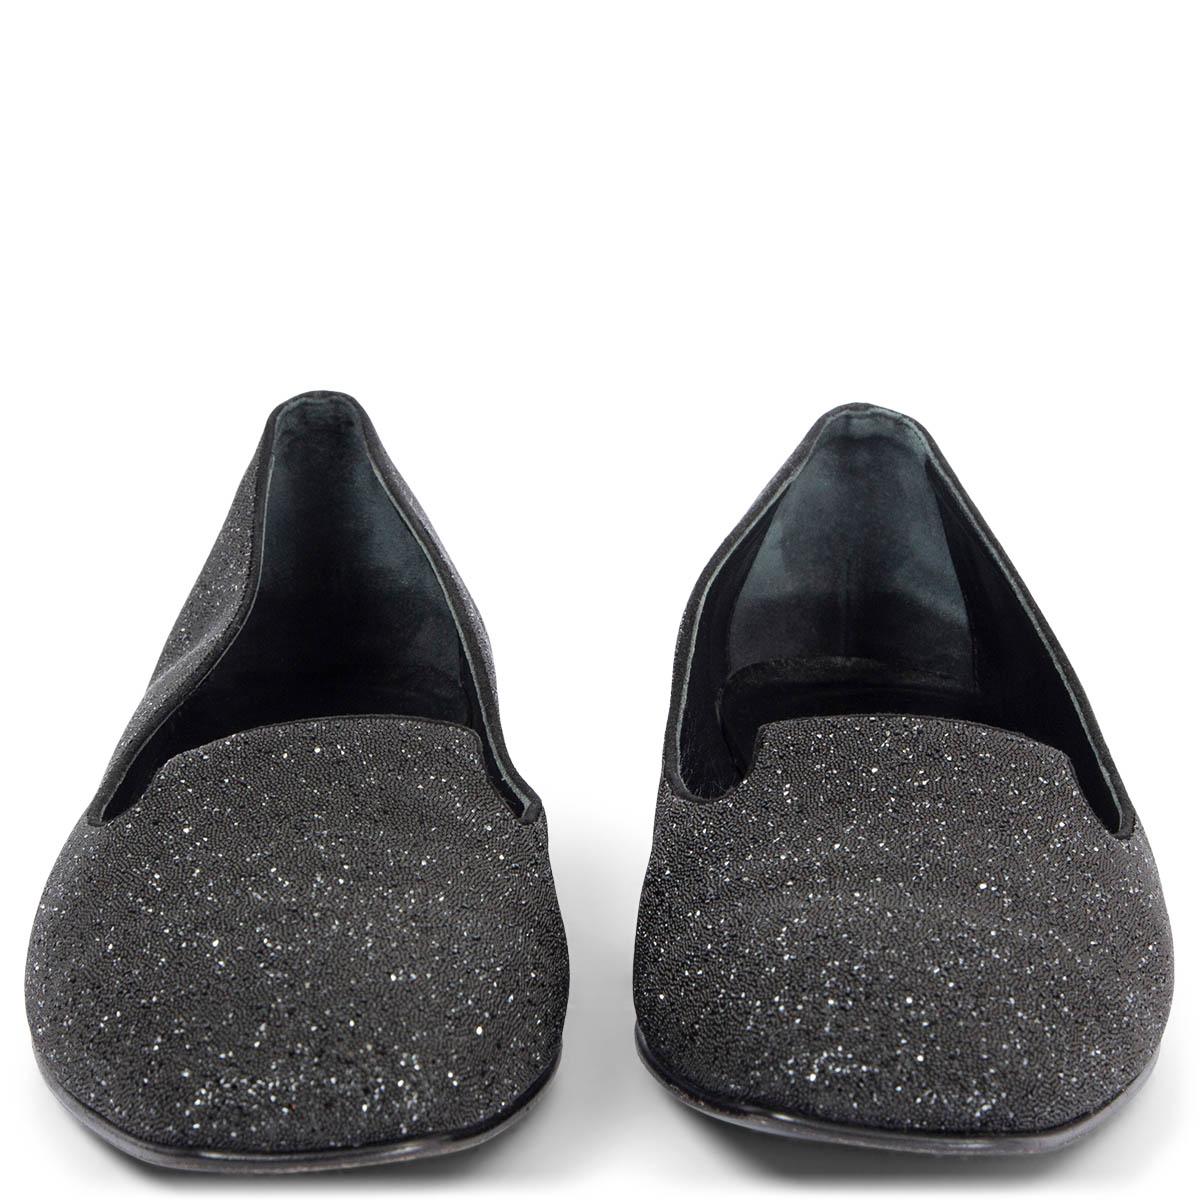 100% authentic Hermès Holly loafers in black metallic glitter embellished calfskin with suede trim and stacked heel. Have been worn and are in excellent condition. 

Measurements
Imprinted Size	37.5
Shoe Size	37.5
Inside Sole	24.5cm